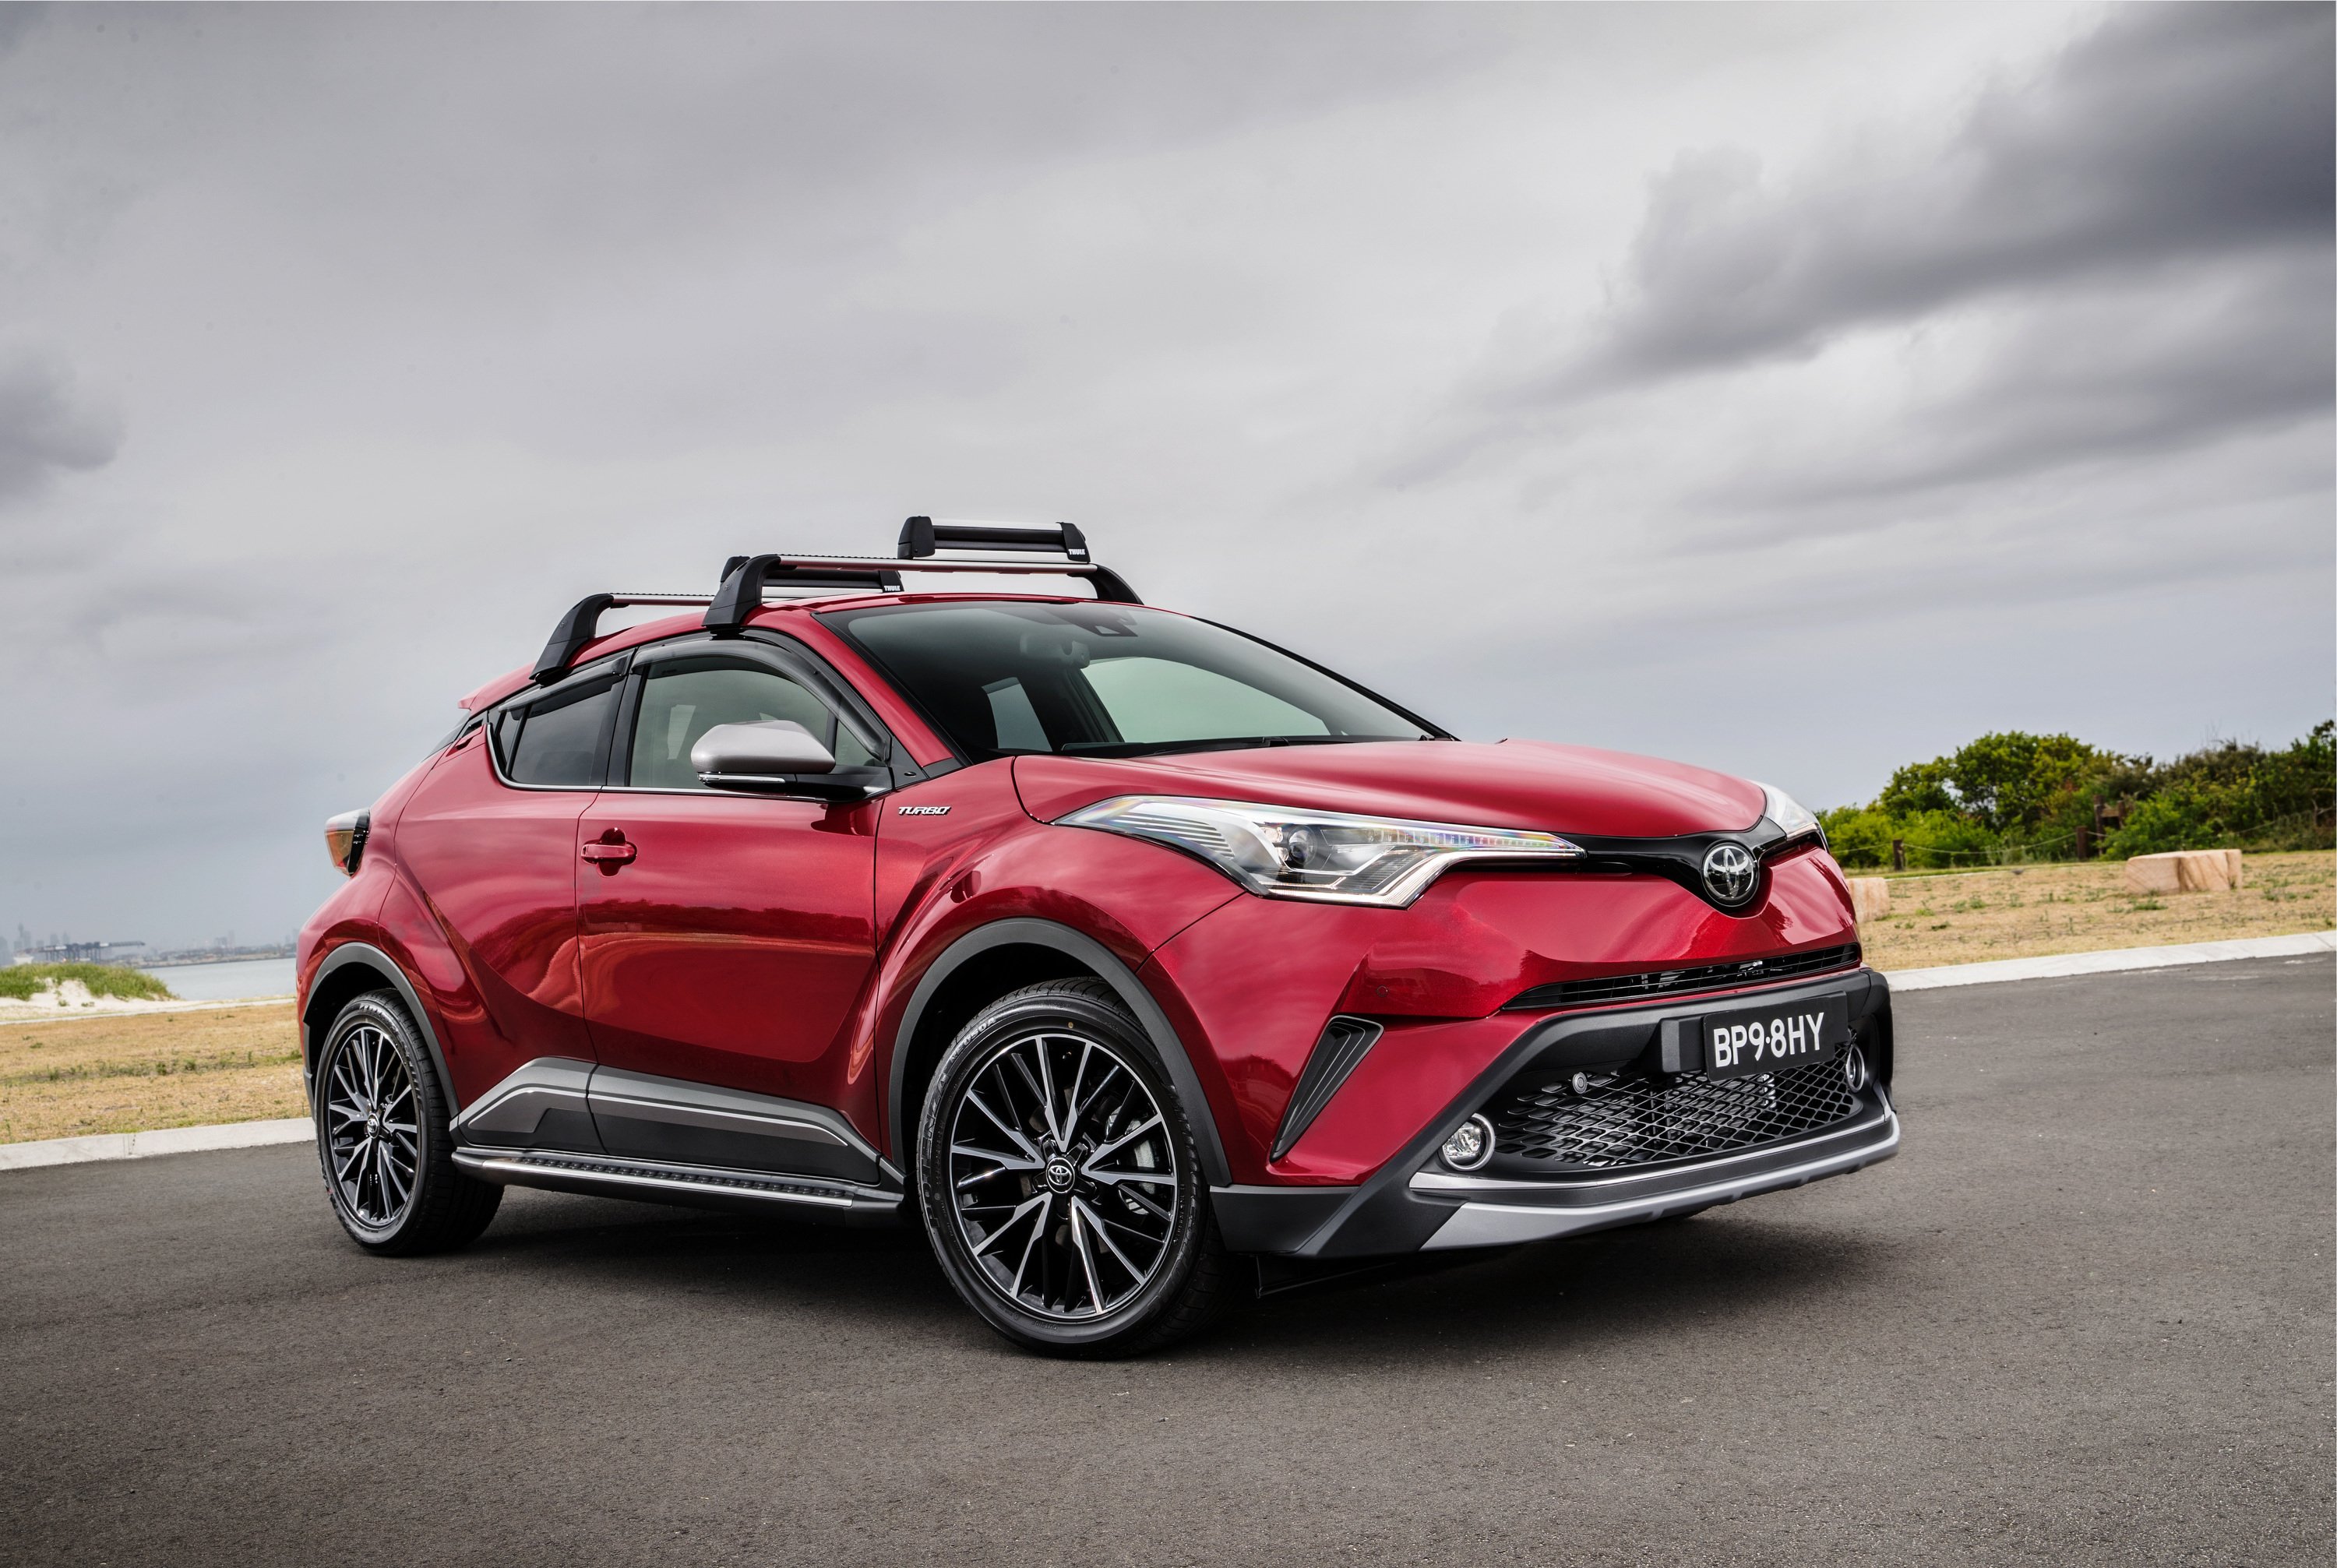 2017 Toyota CHR pricing and specs Photos (1 of 14)